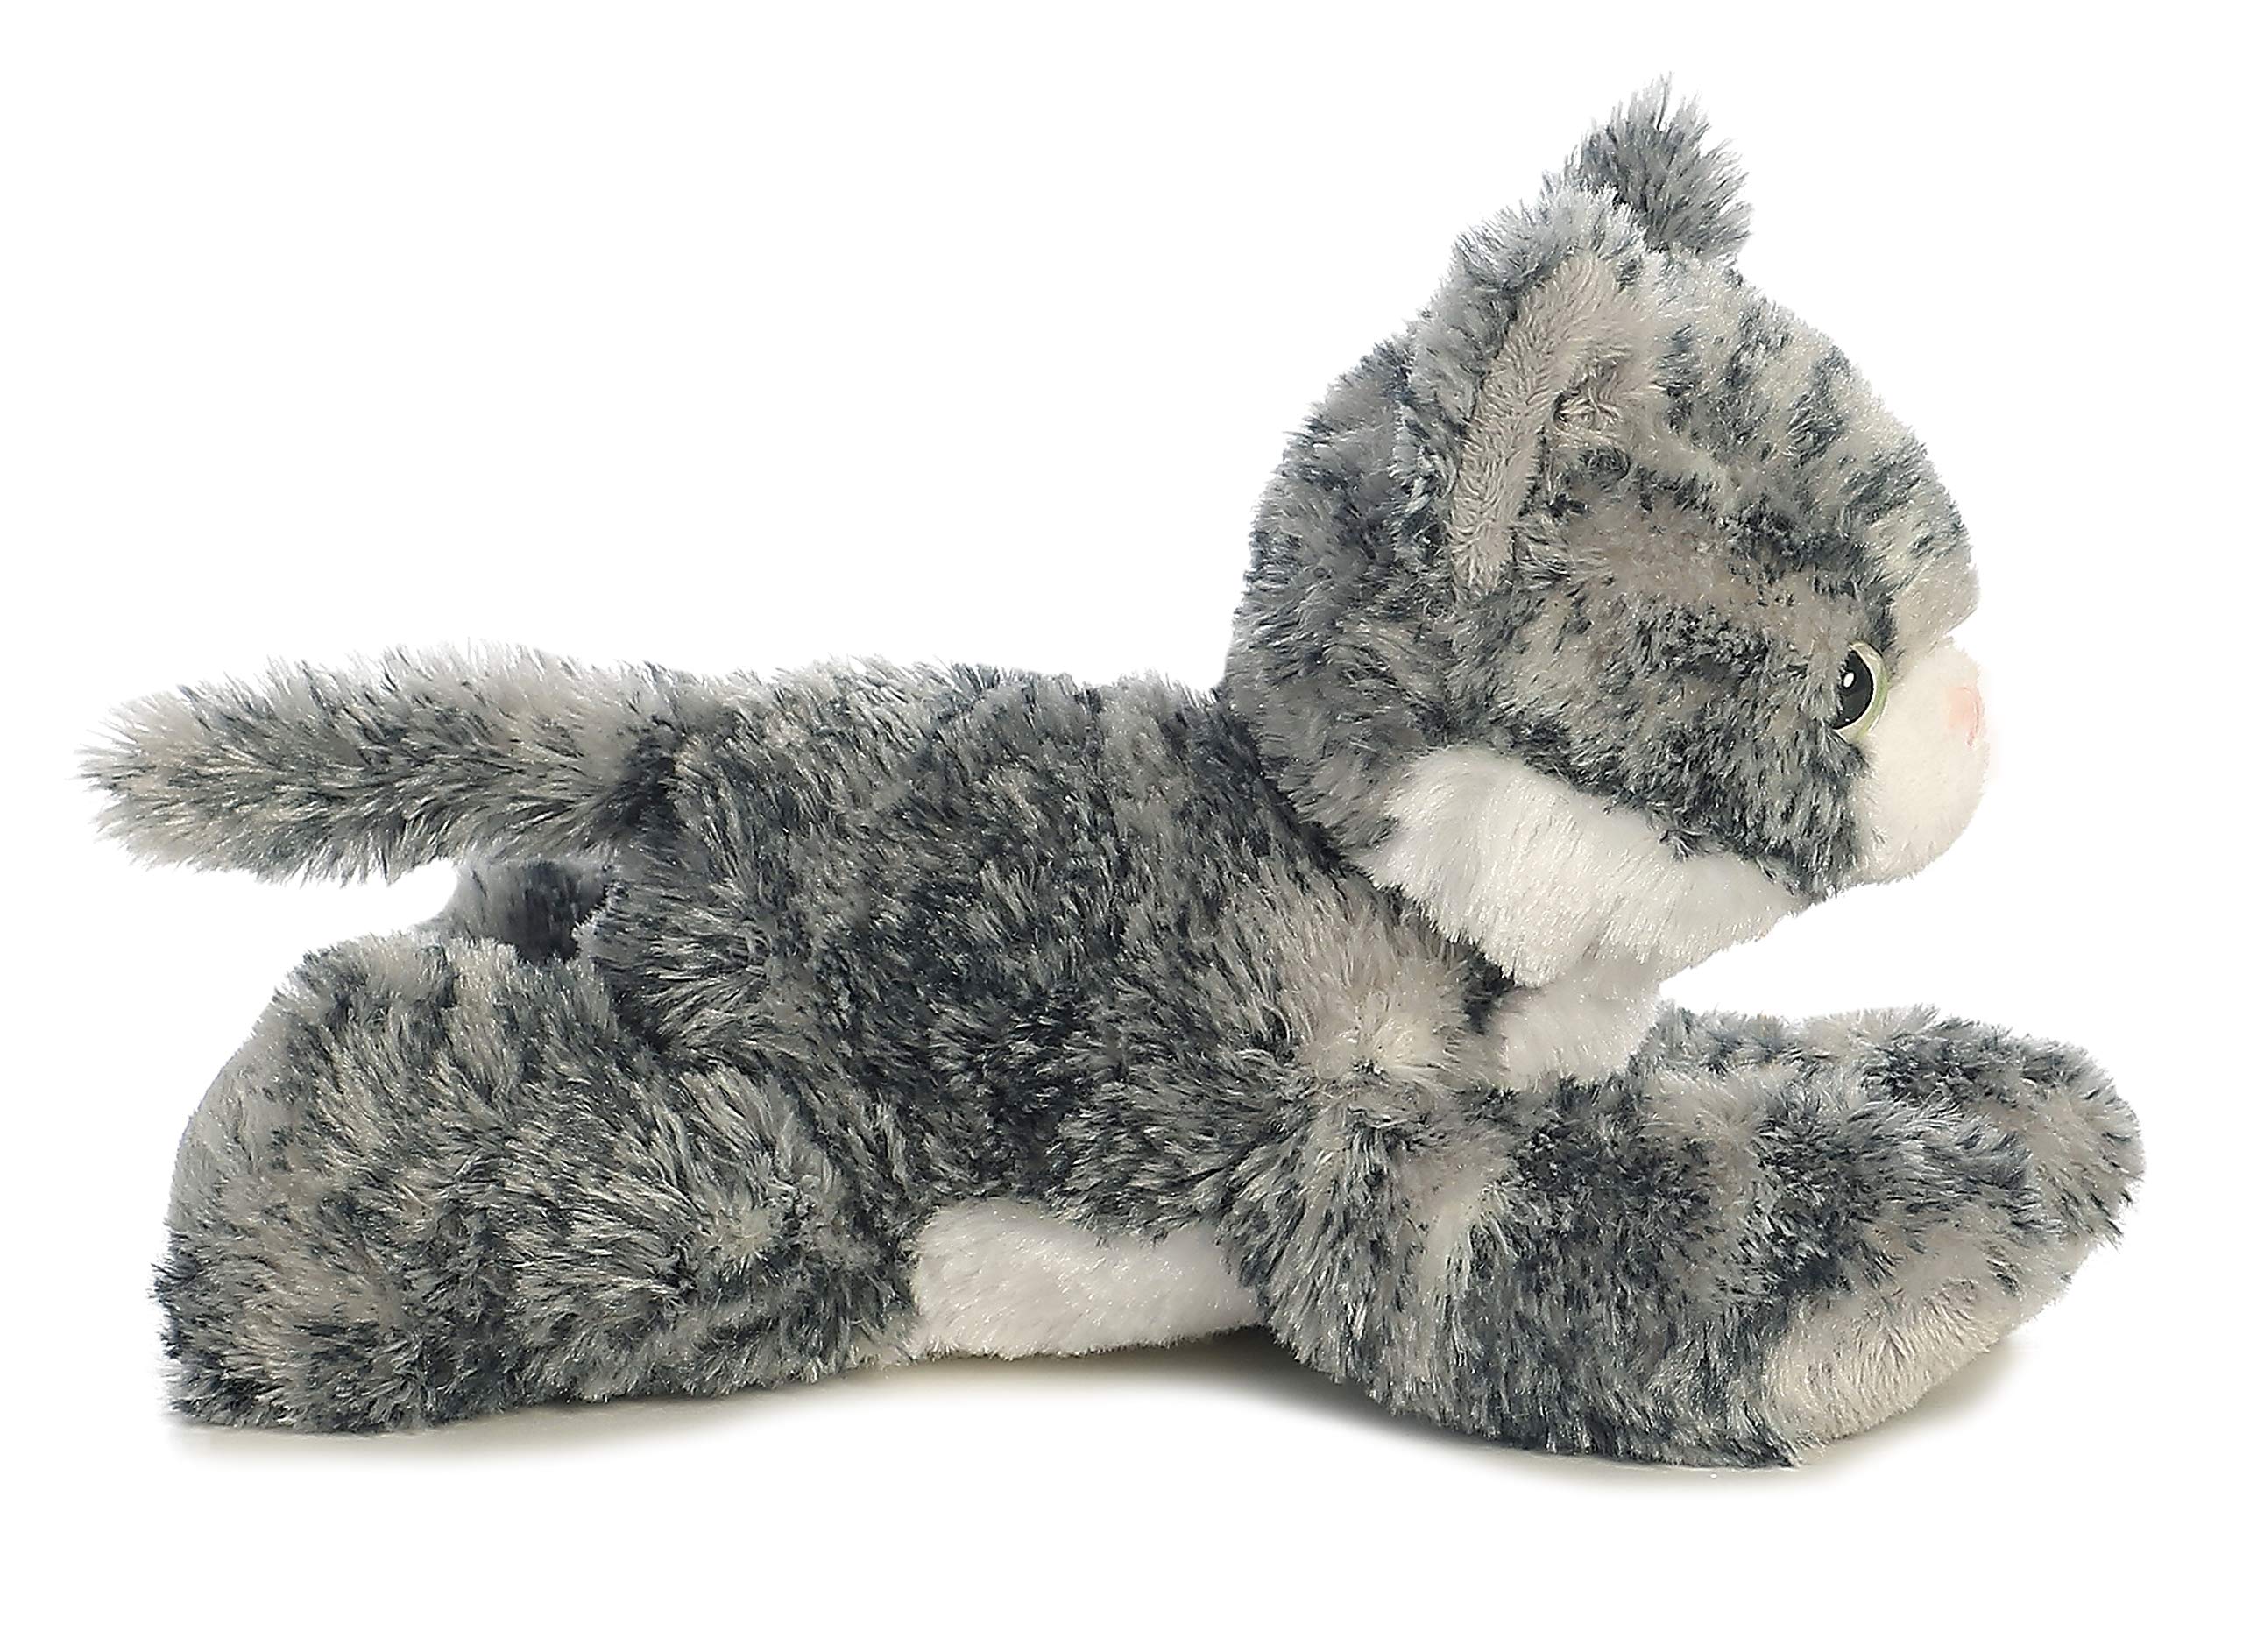 Aurora® Adorable Mini Flopsie™ Lily™ Stuffed Animal - Playful Ease - Timeless Companions - Gray 8 Inches